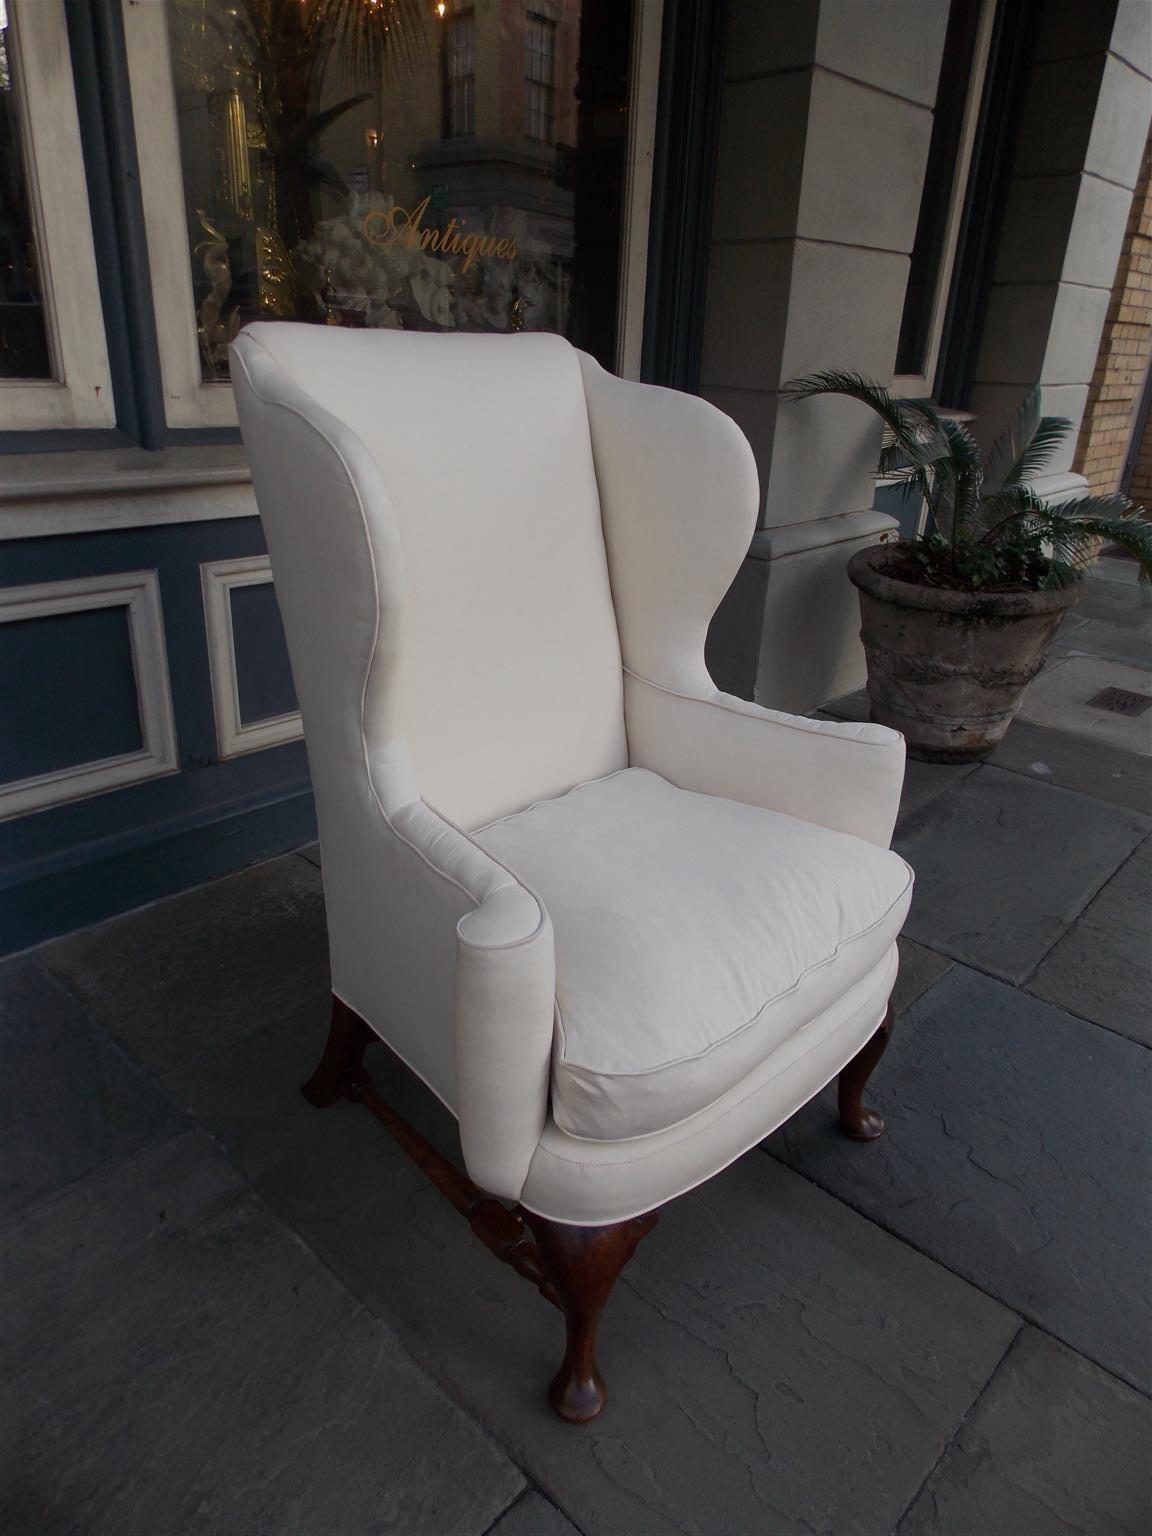 American Queen Anne walnut wing back chair with straight back, flared wings, flanking scrolled arms, removable seat cushion, bulbous turned ringed stretchers, and terminating on the original pad feet with rear splayed legs. Secondary wood consist of